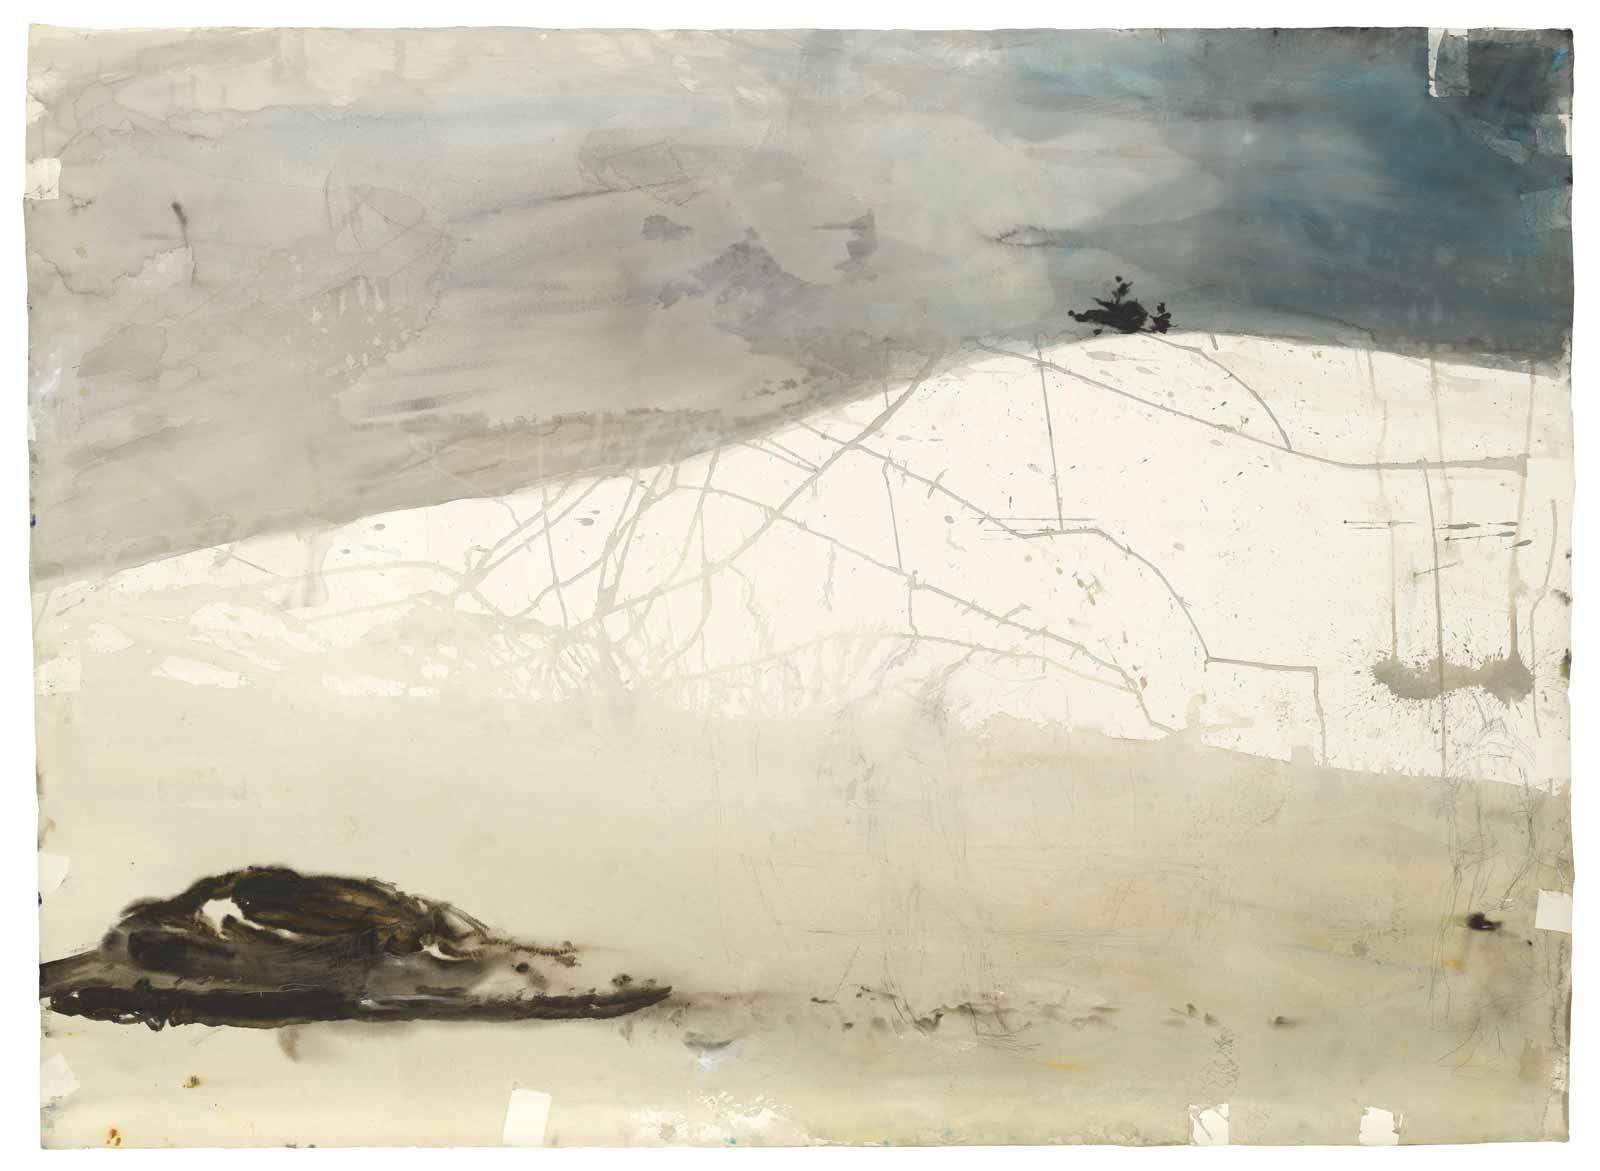 Andrew Wyeth, Kuerner's Hill 1 (Funeral Group), ca. 1991–94. 